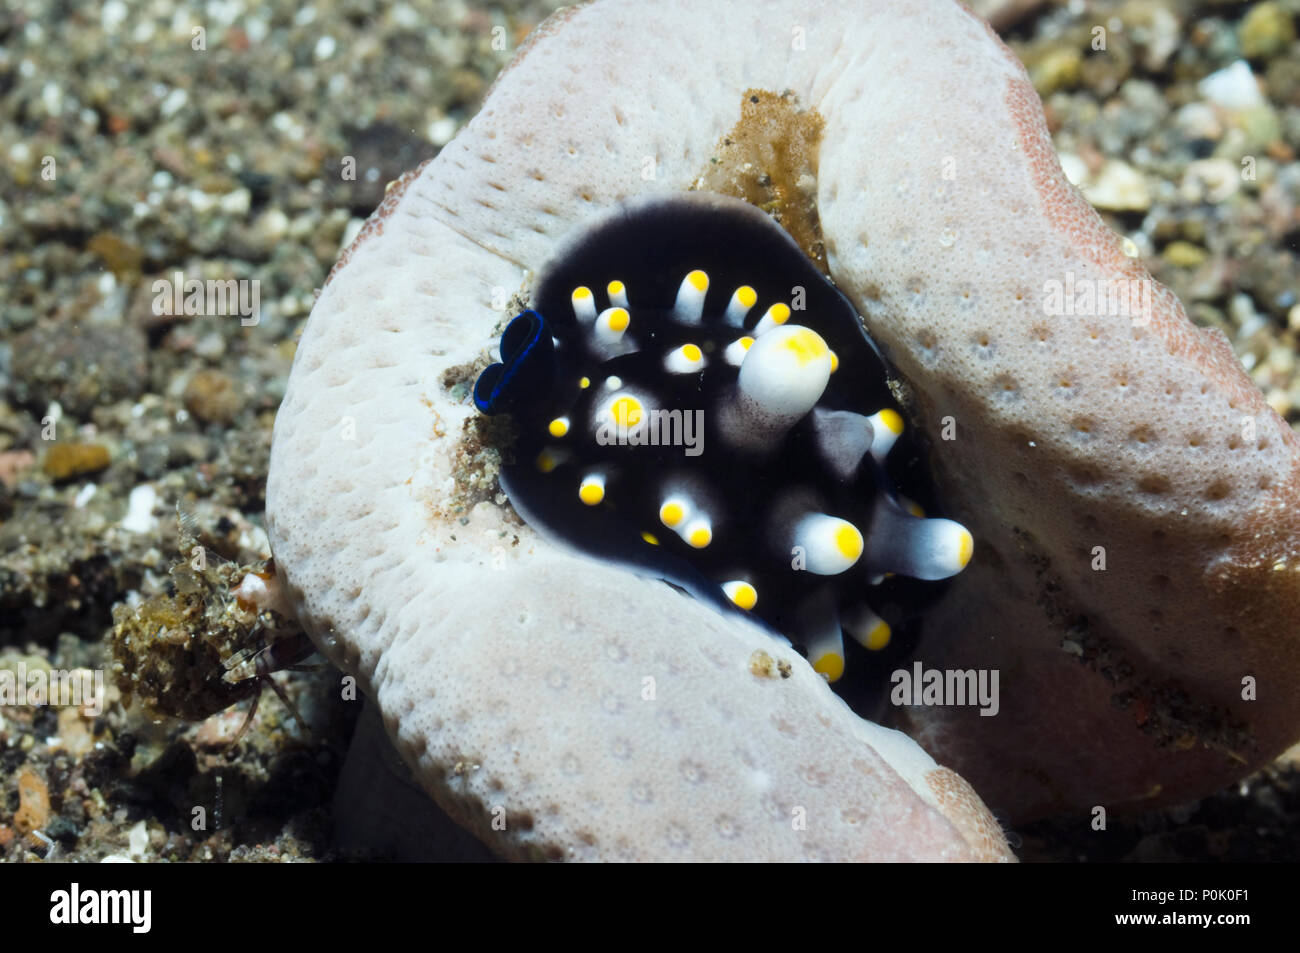 Juvenile Egg cowrie (Ovula ovum) on leahter coral on which it feeds.  Indonesia. Stock Photo